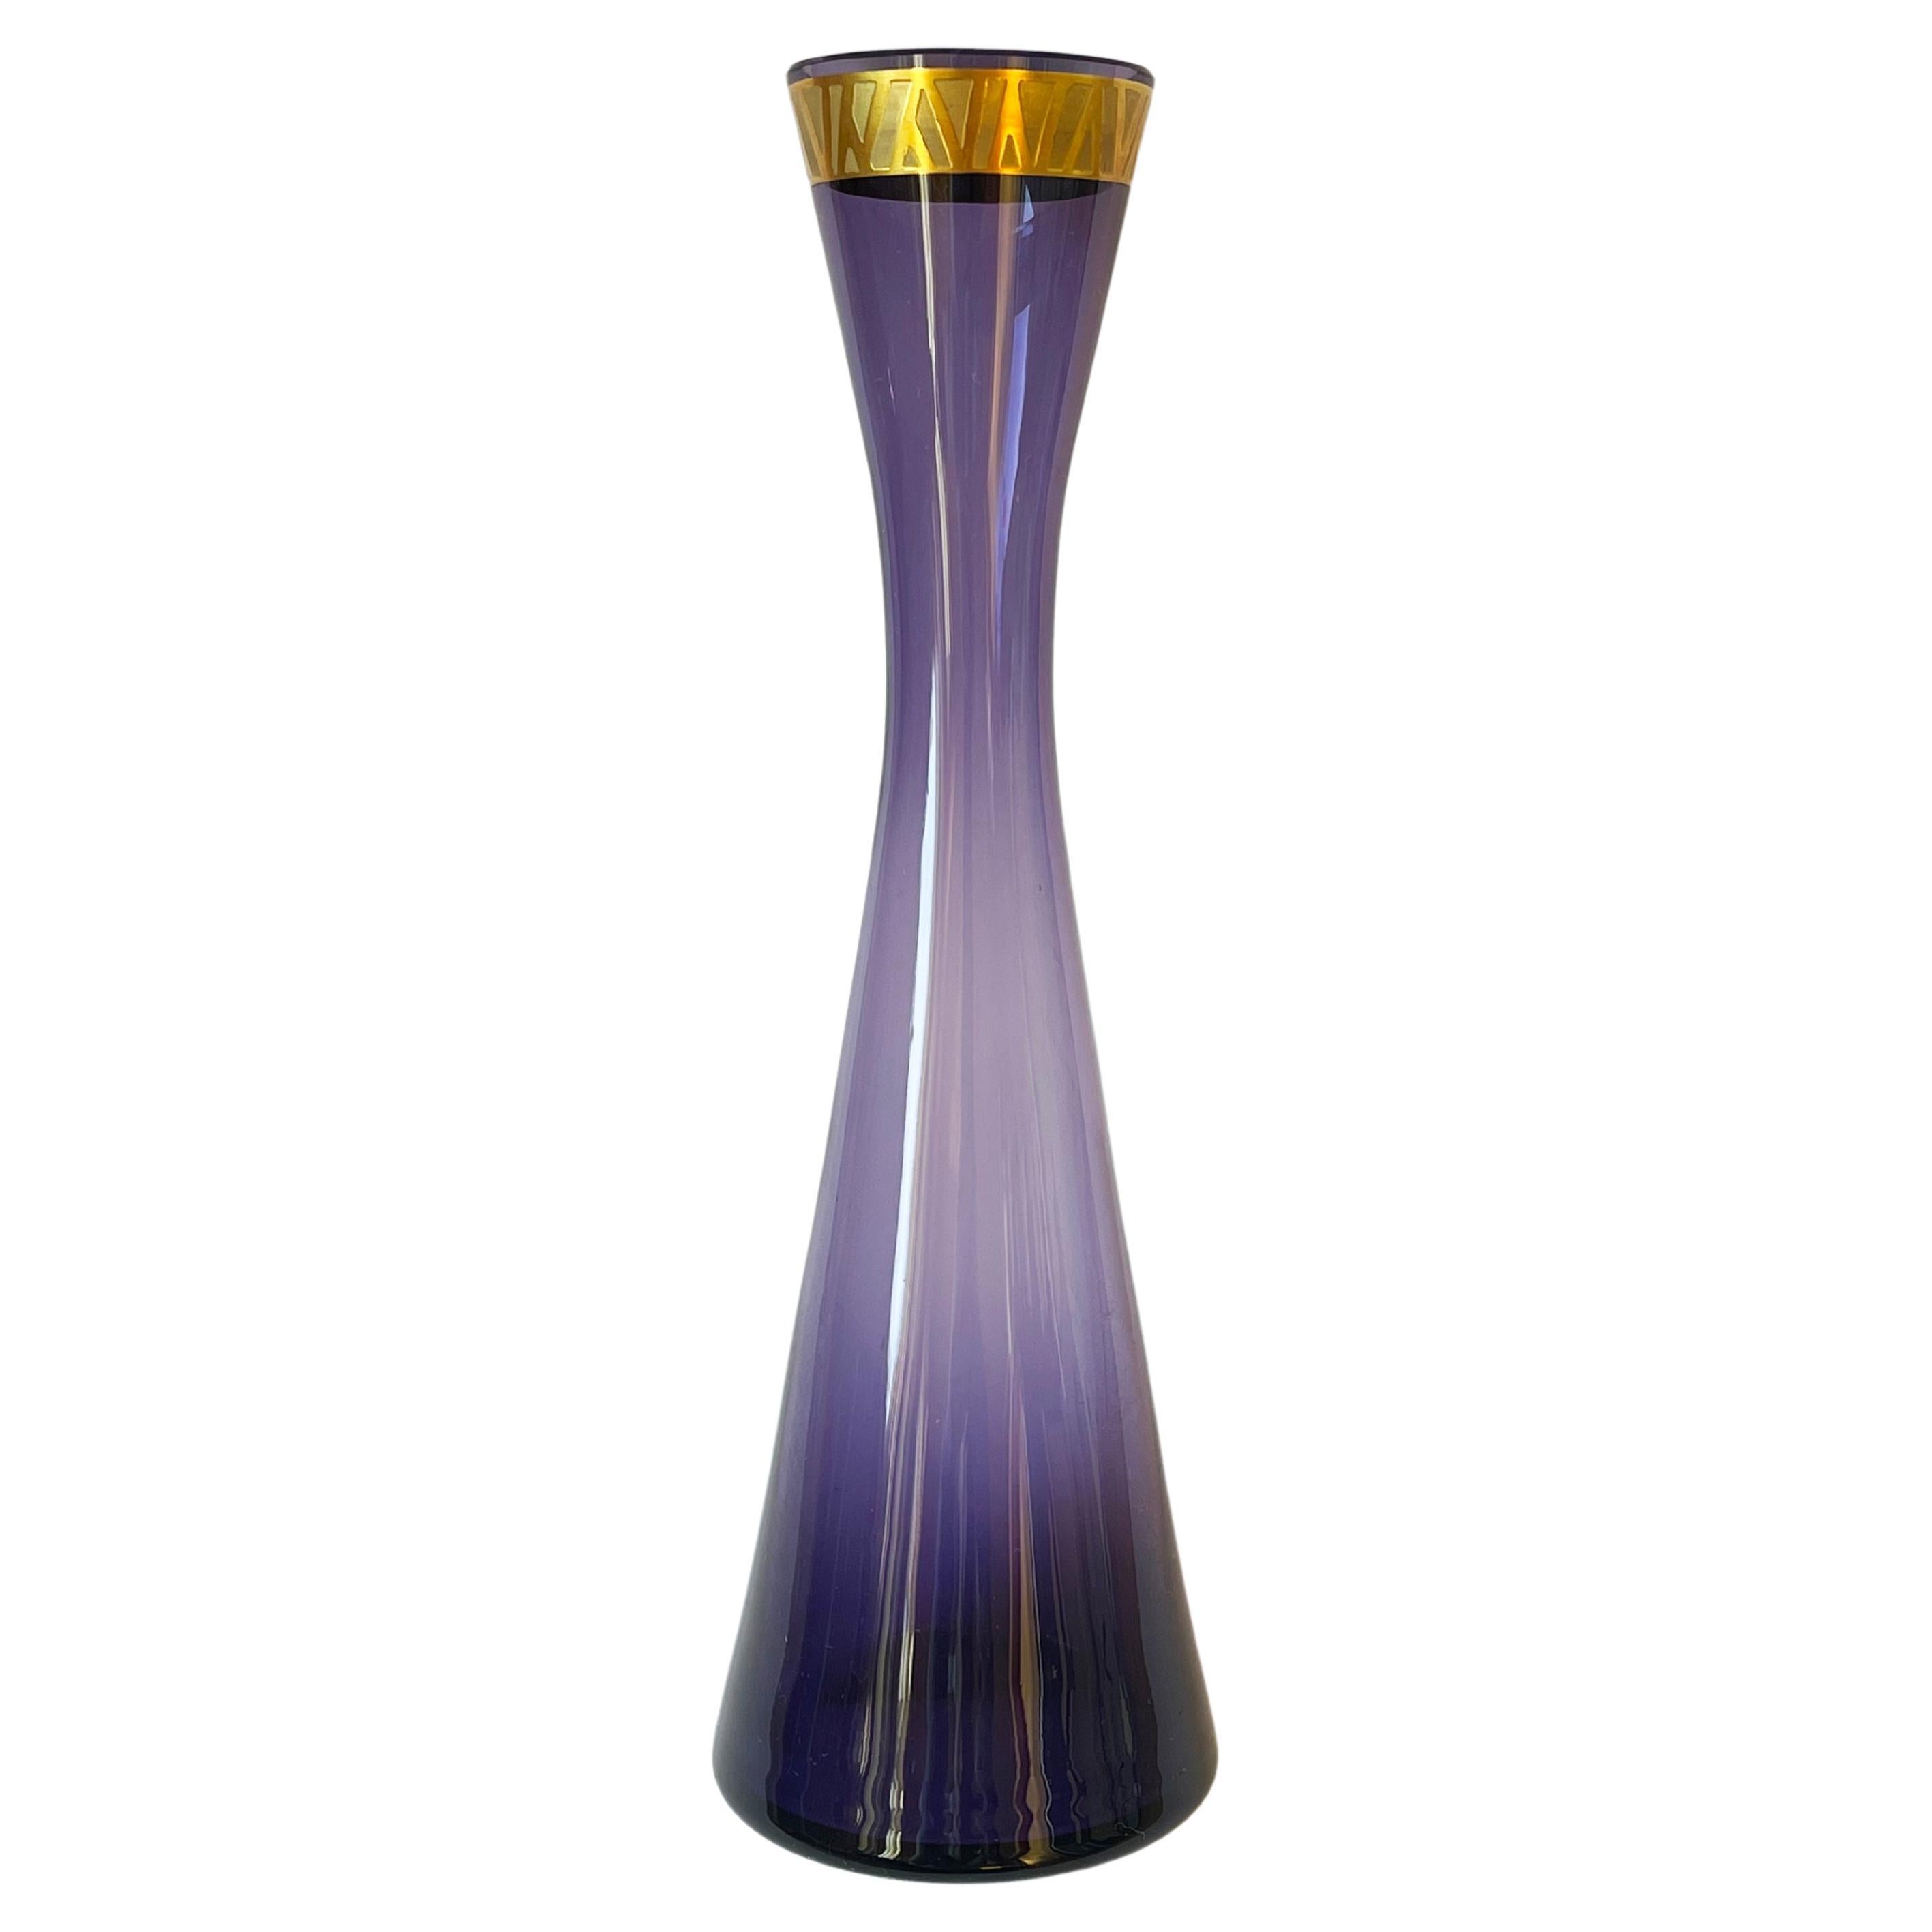 Fantastic, placed to the mid-century German art glass era.
The vase is created from purple glass, the rim hand cut, the golden frieze at the top, simply beautiful in it's simplicity.
The more shiny lines of the relief stand out, and are inbetween